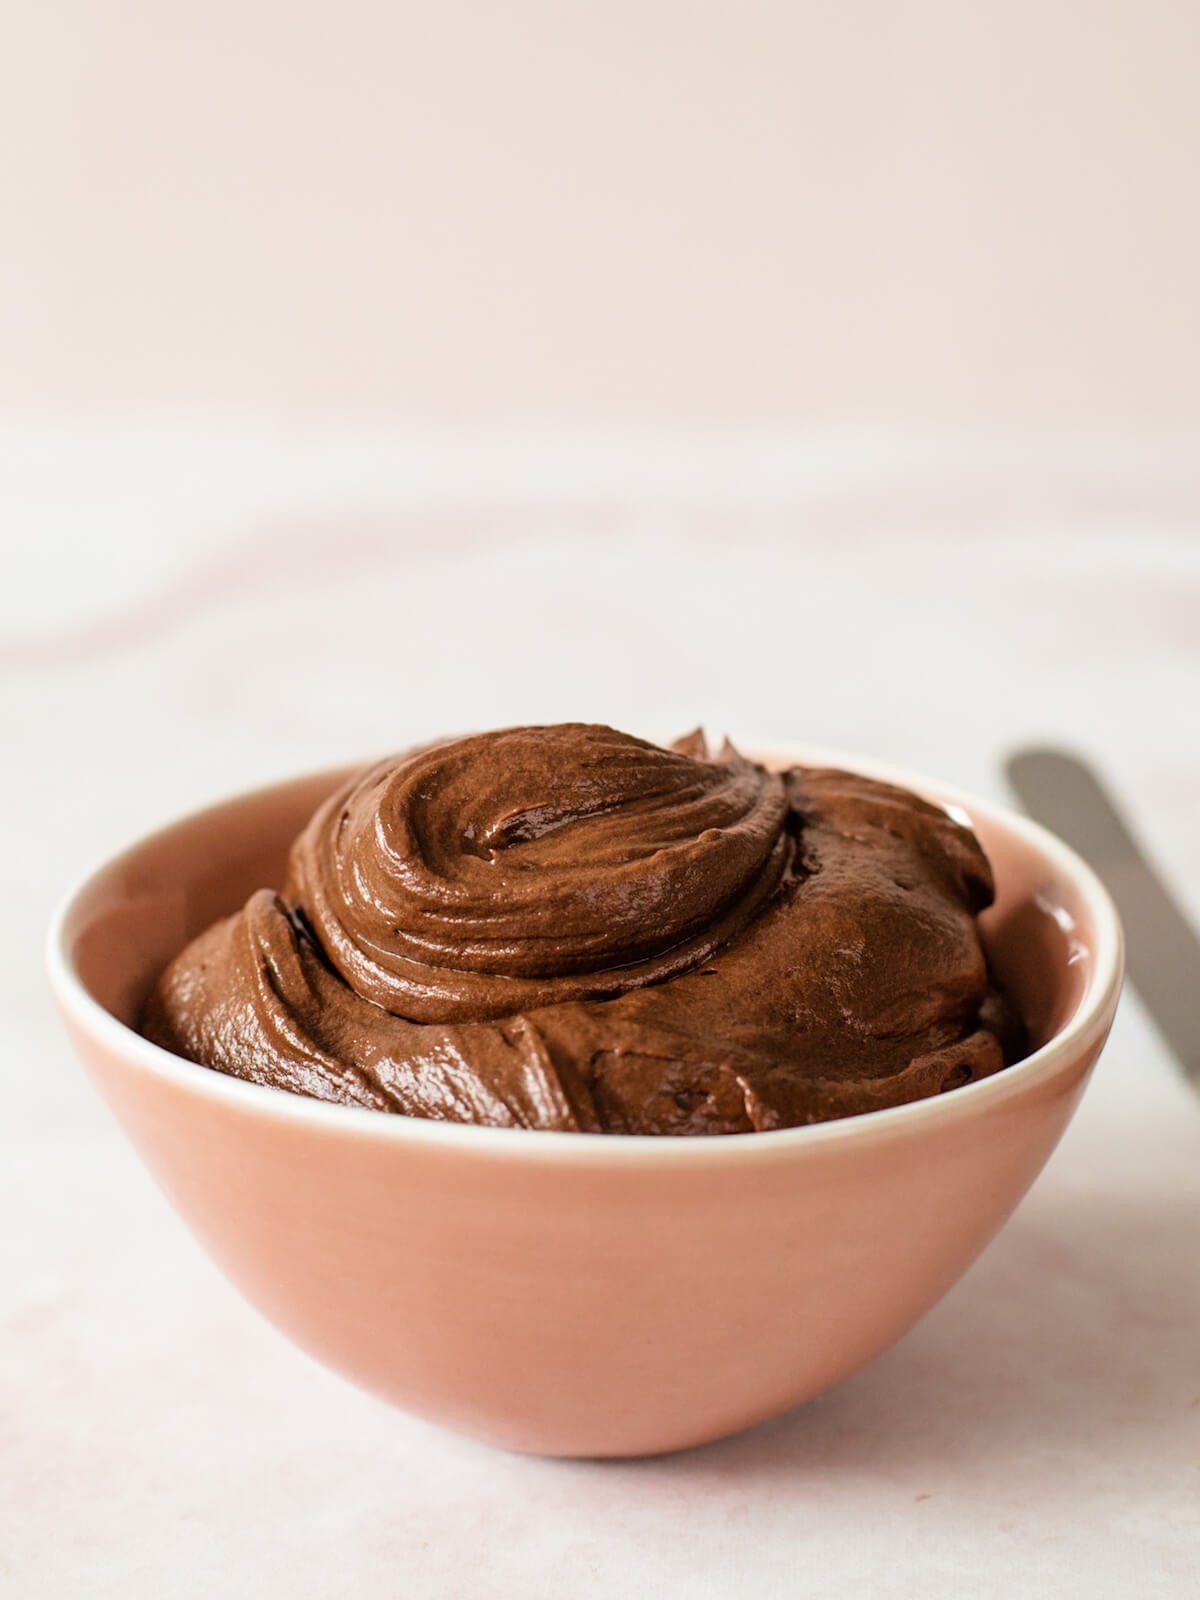 pink bowl of chocolate ganache frosting